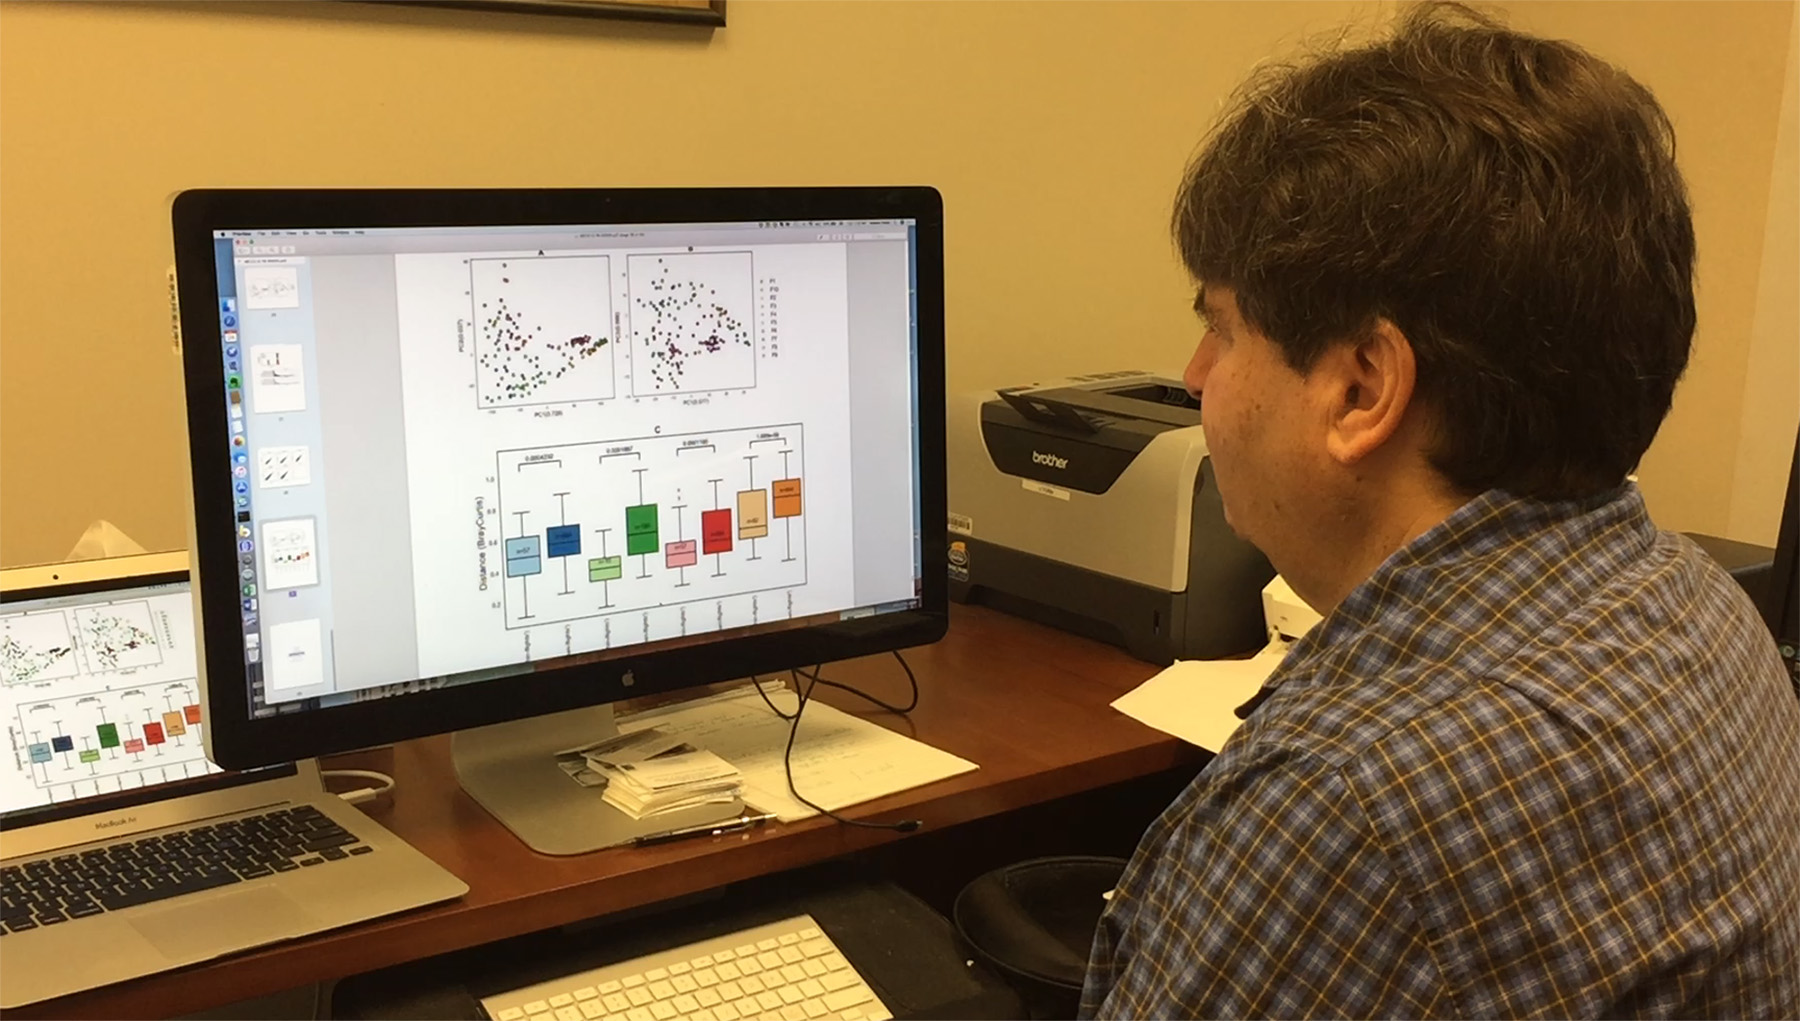 Georgia Tech Professor Howard Weiss reviews data about bacteria found on aircraft studied by a research team that sampled tray tables, seat belt buckles and the handles of lavatory doors. (Credit: John Toon, Georgia Tech)

 